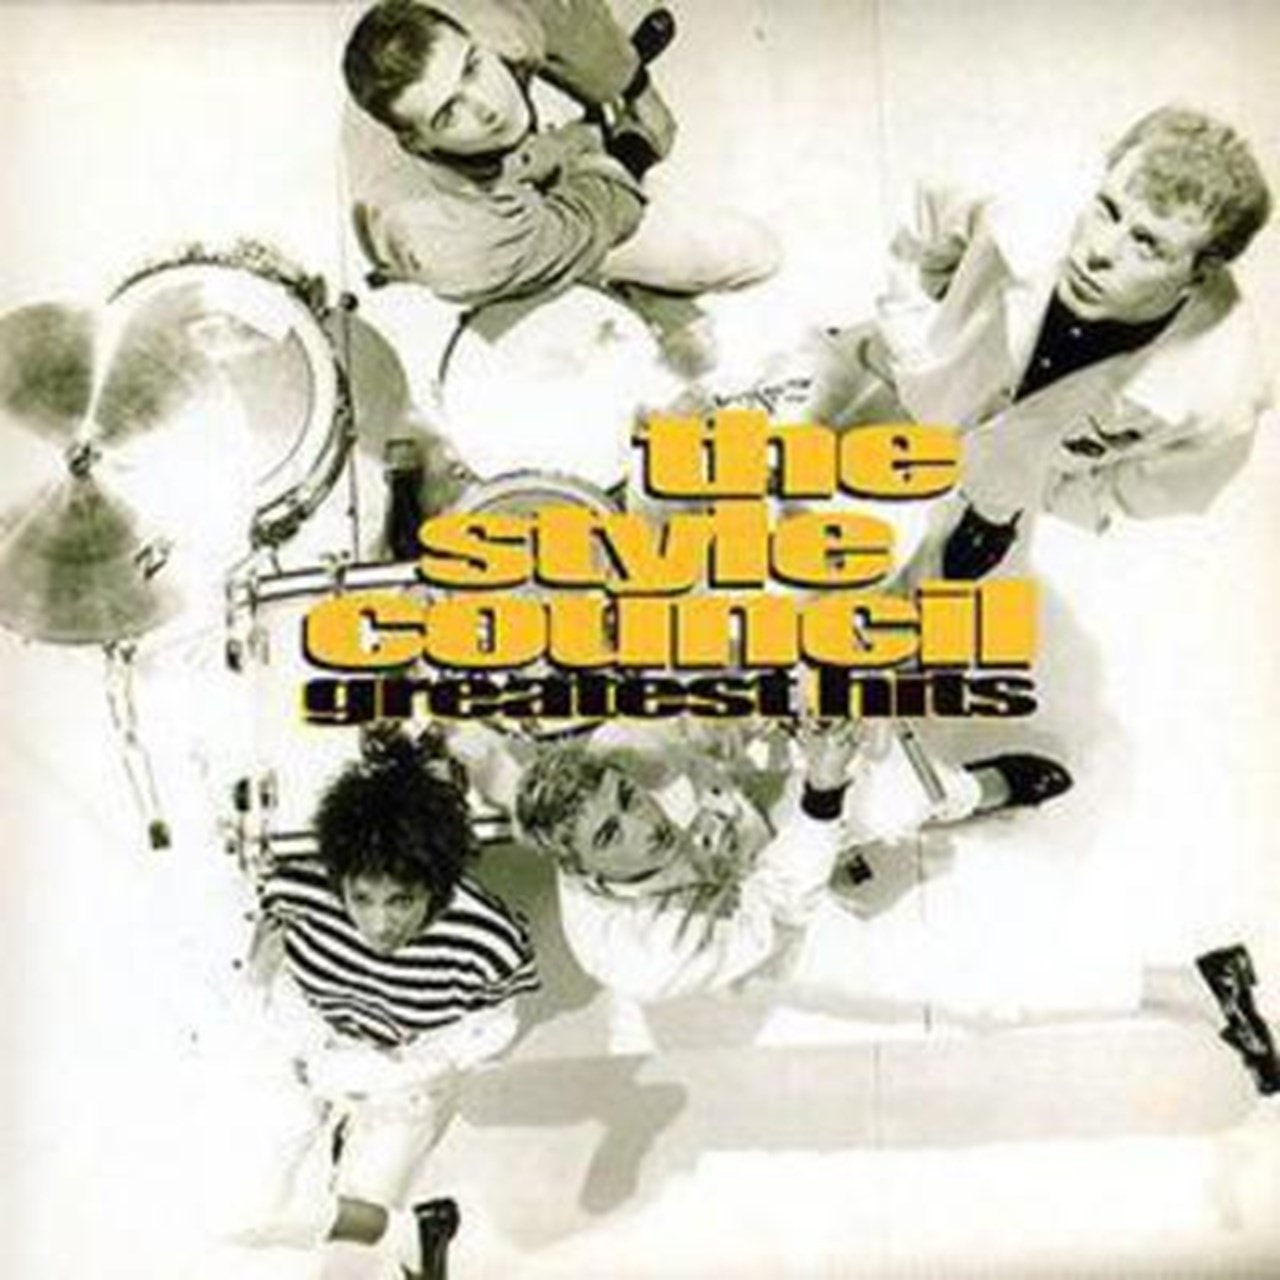 the style council greatest hits